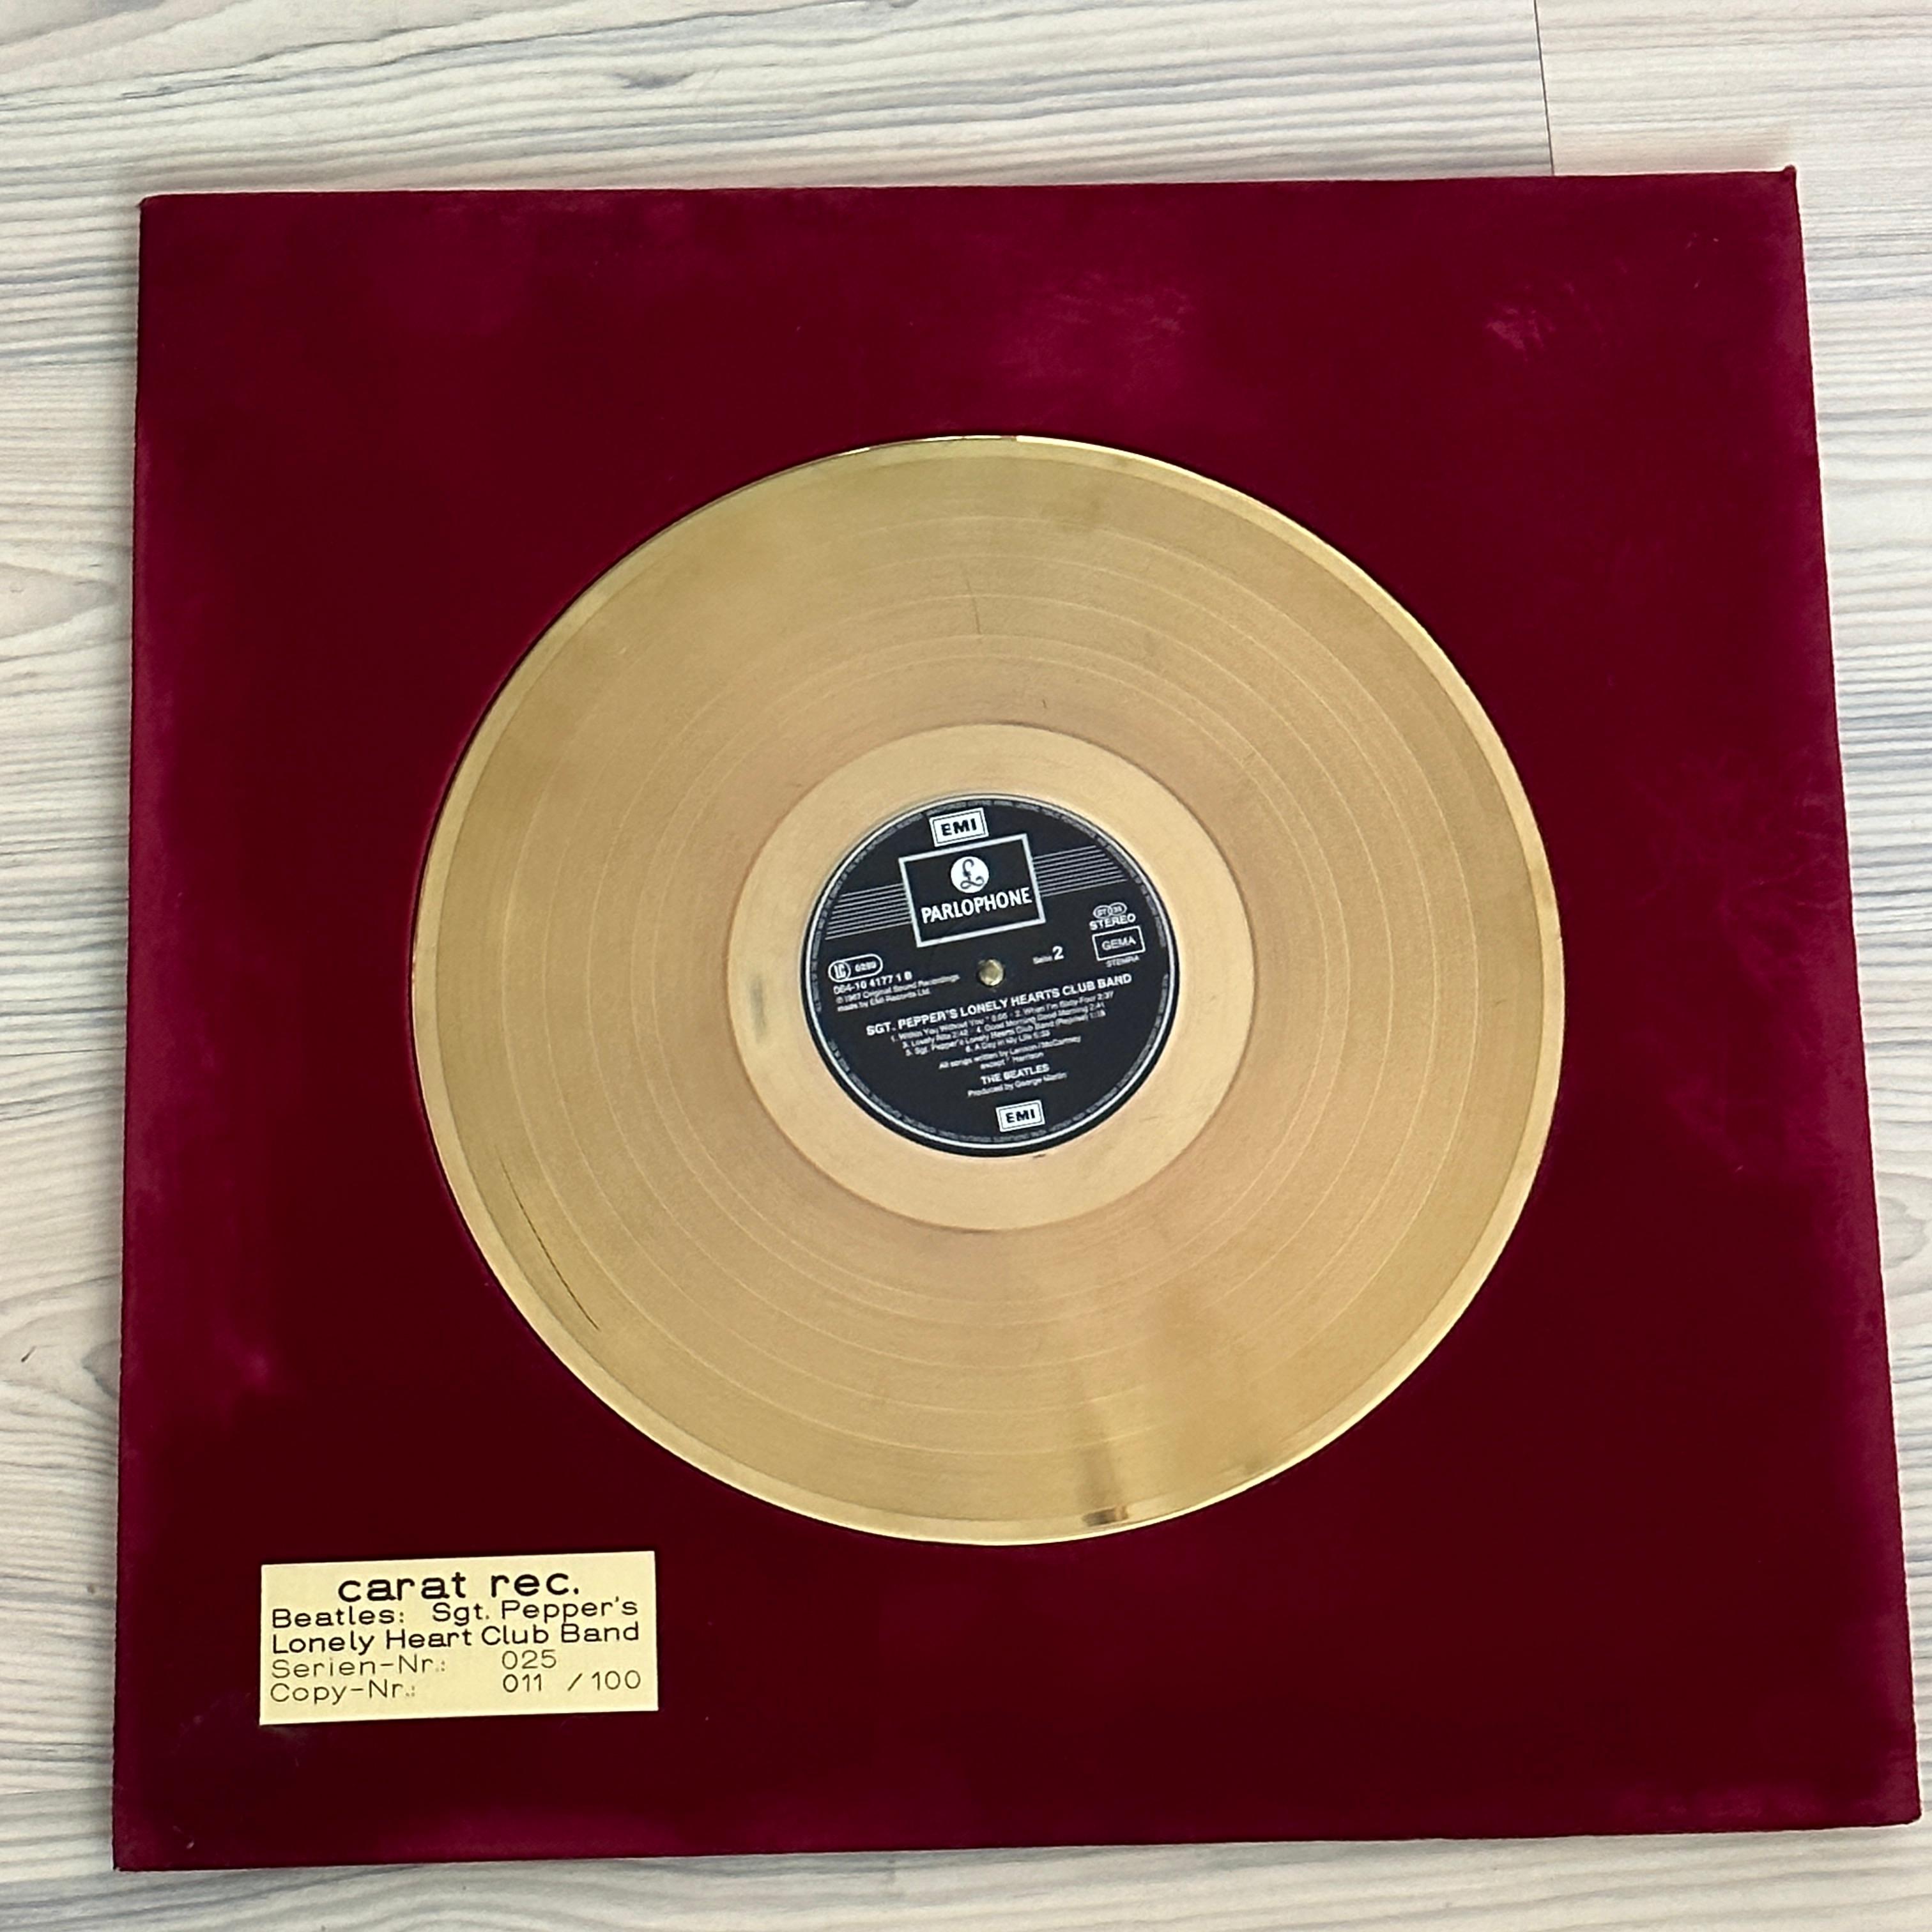 Beatles Sgt. Peppers Lonely Hearts Club Band Golden Record Carat Rec 011/100 For Sale 7